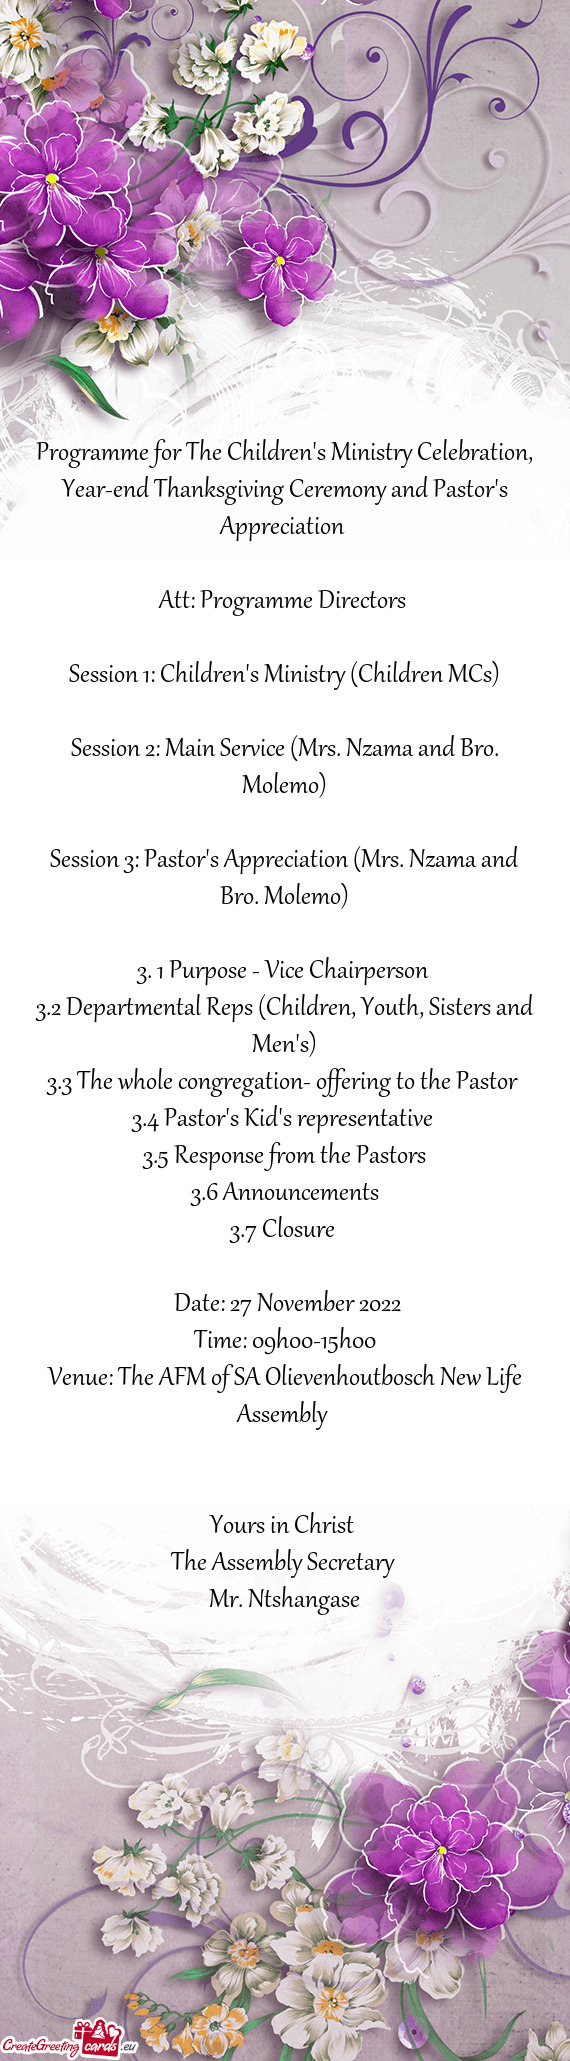 Programme for The Children's Ministry Celebration, Year-end Thanksgiving Ceremony and Pastor's Appre